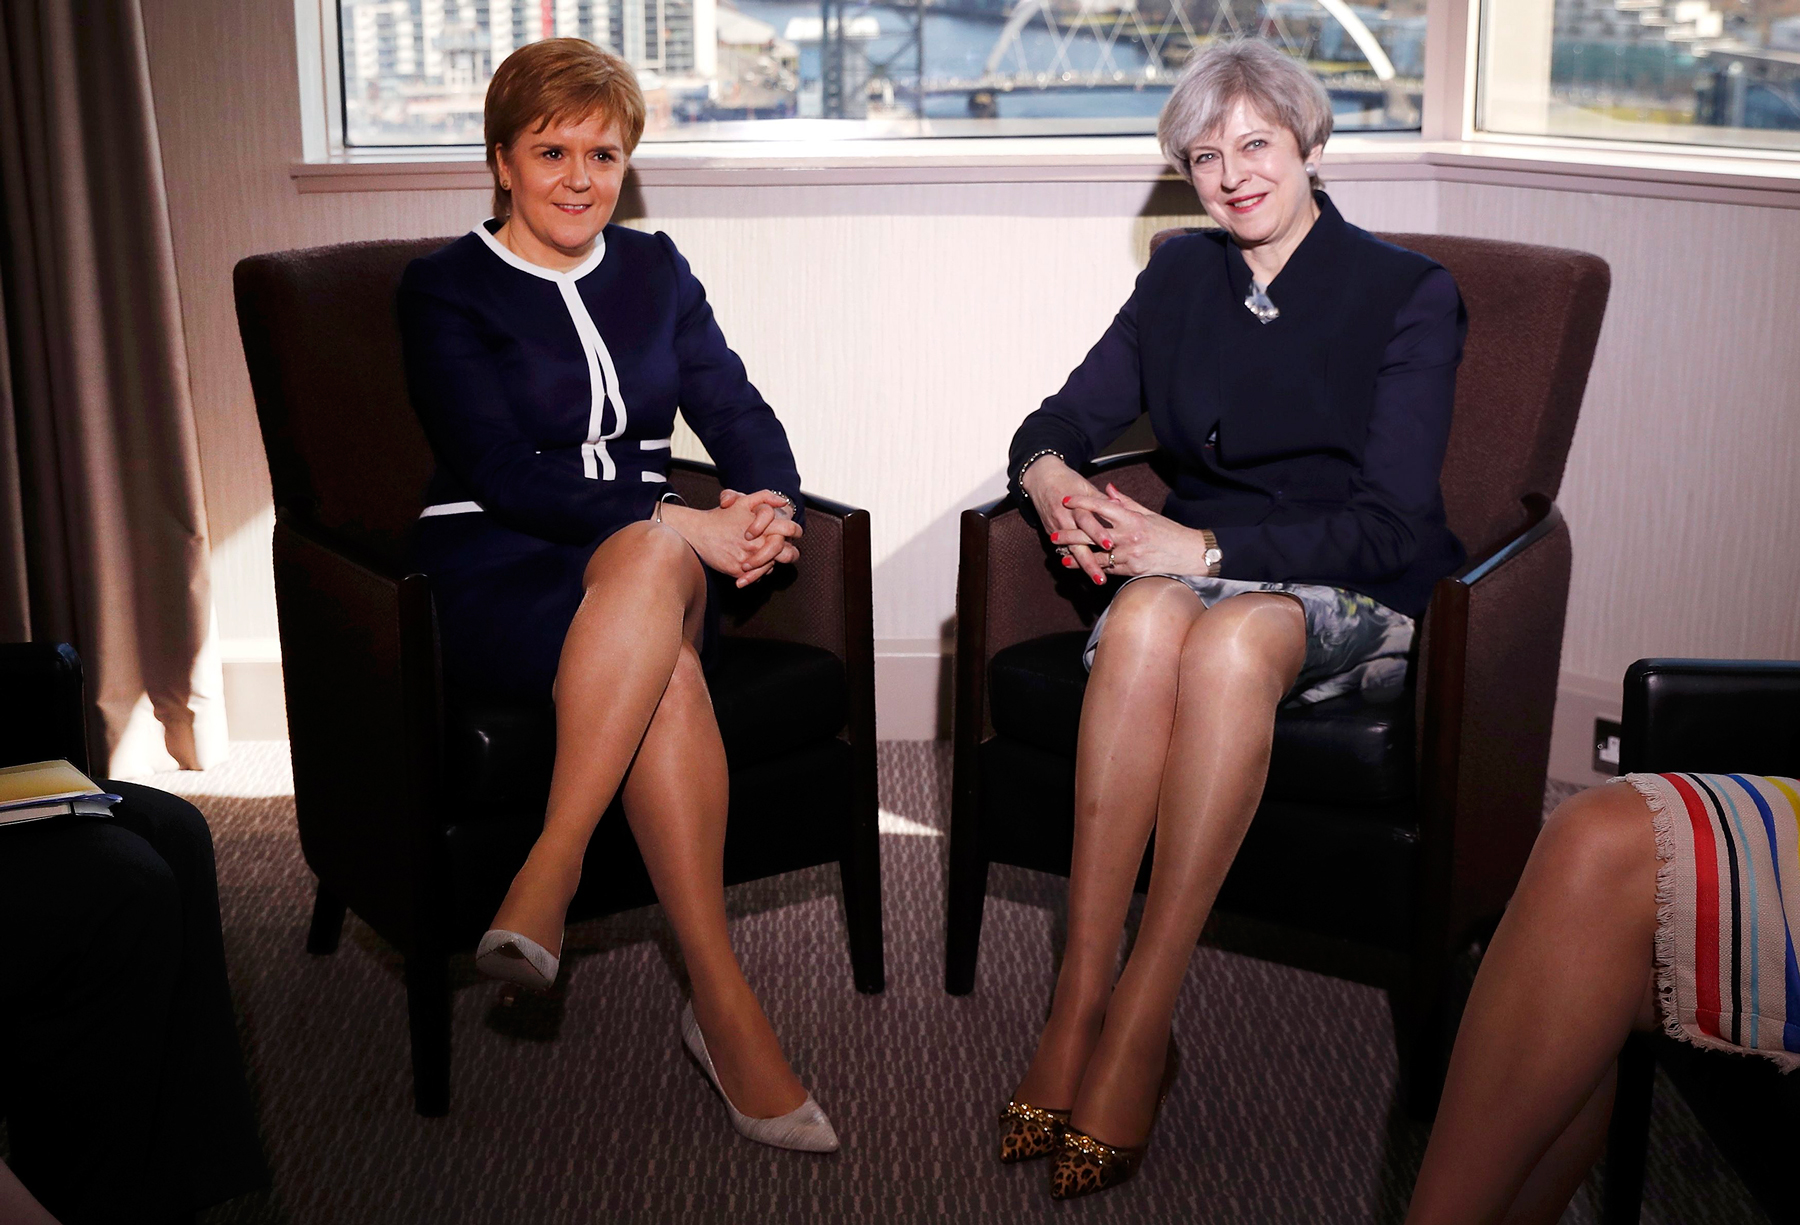 British Prime Minister Theresa May meets with Scottish First Minister Nicola Sturgeon at the Crown Plaza Hotel in Glasgow, Scotland, on March 27, 2017.